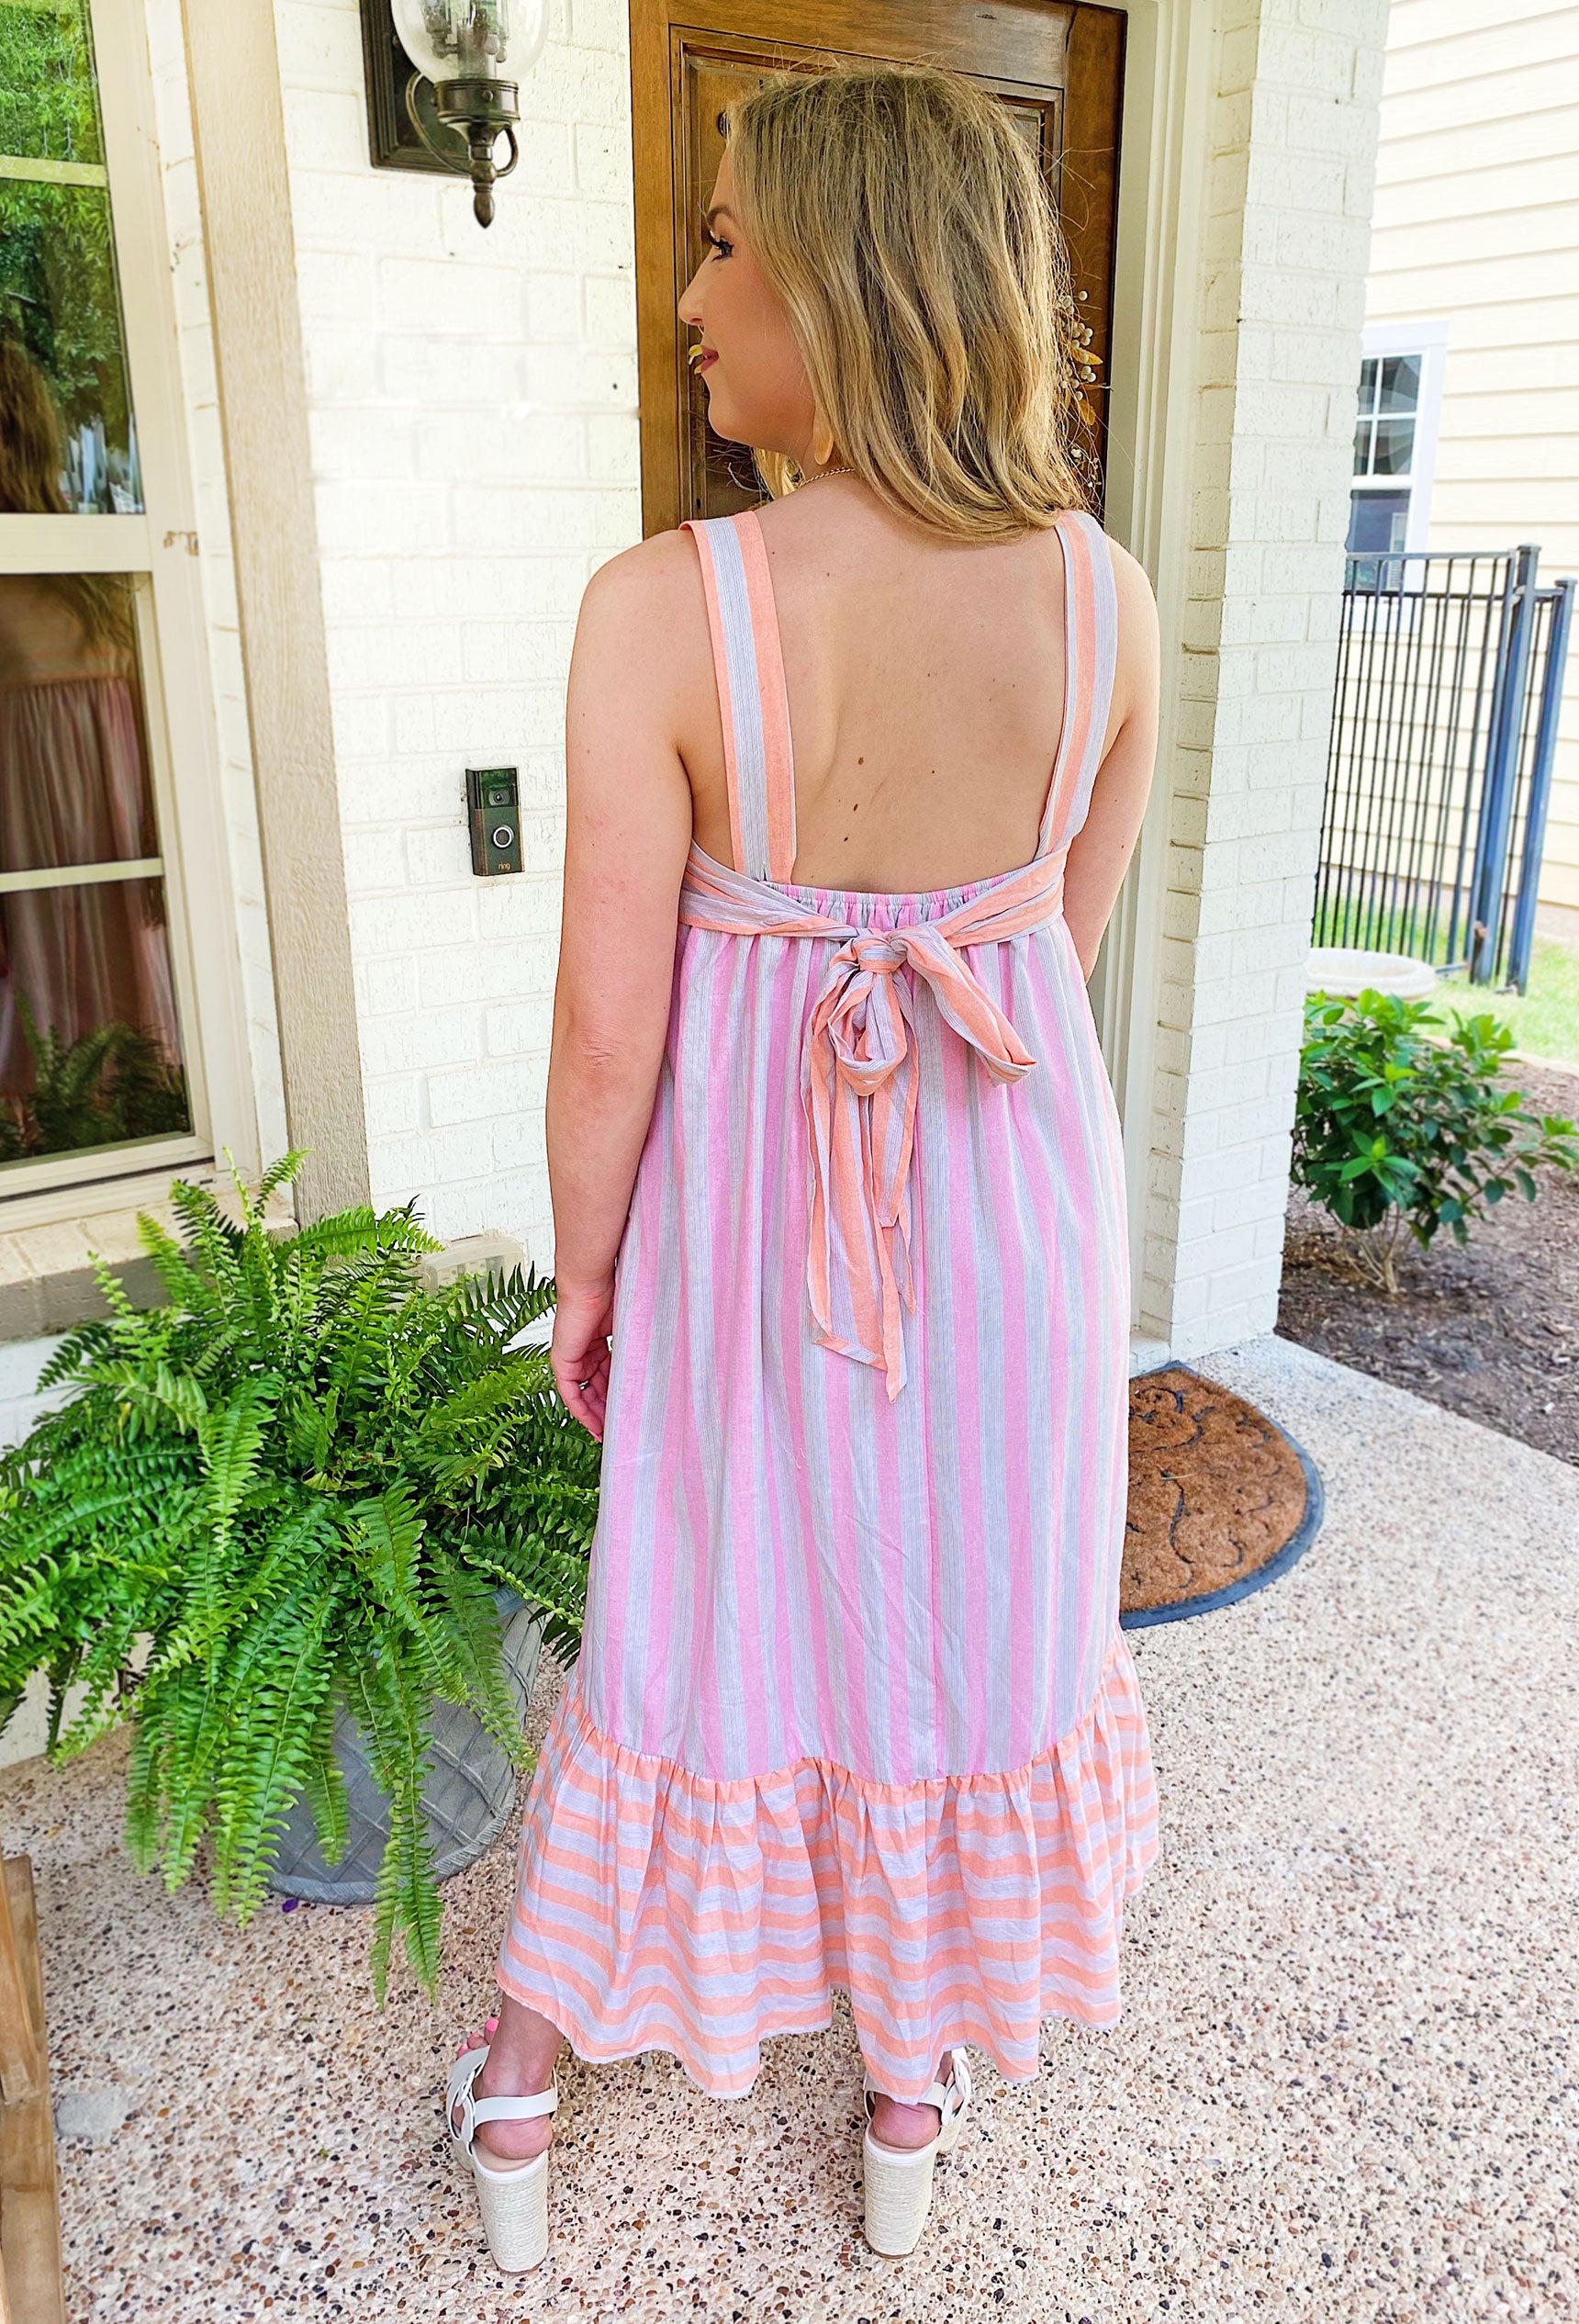 Destination Dreamy Maxi Dress, Midi dress featuring neutral and bright stripes, detailed bow tie in the back